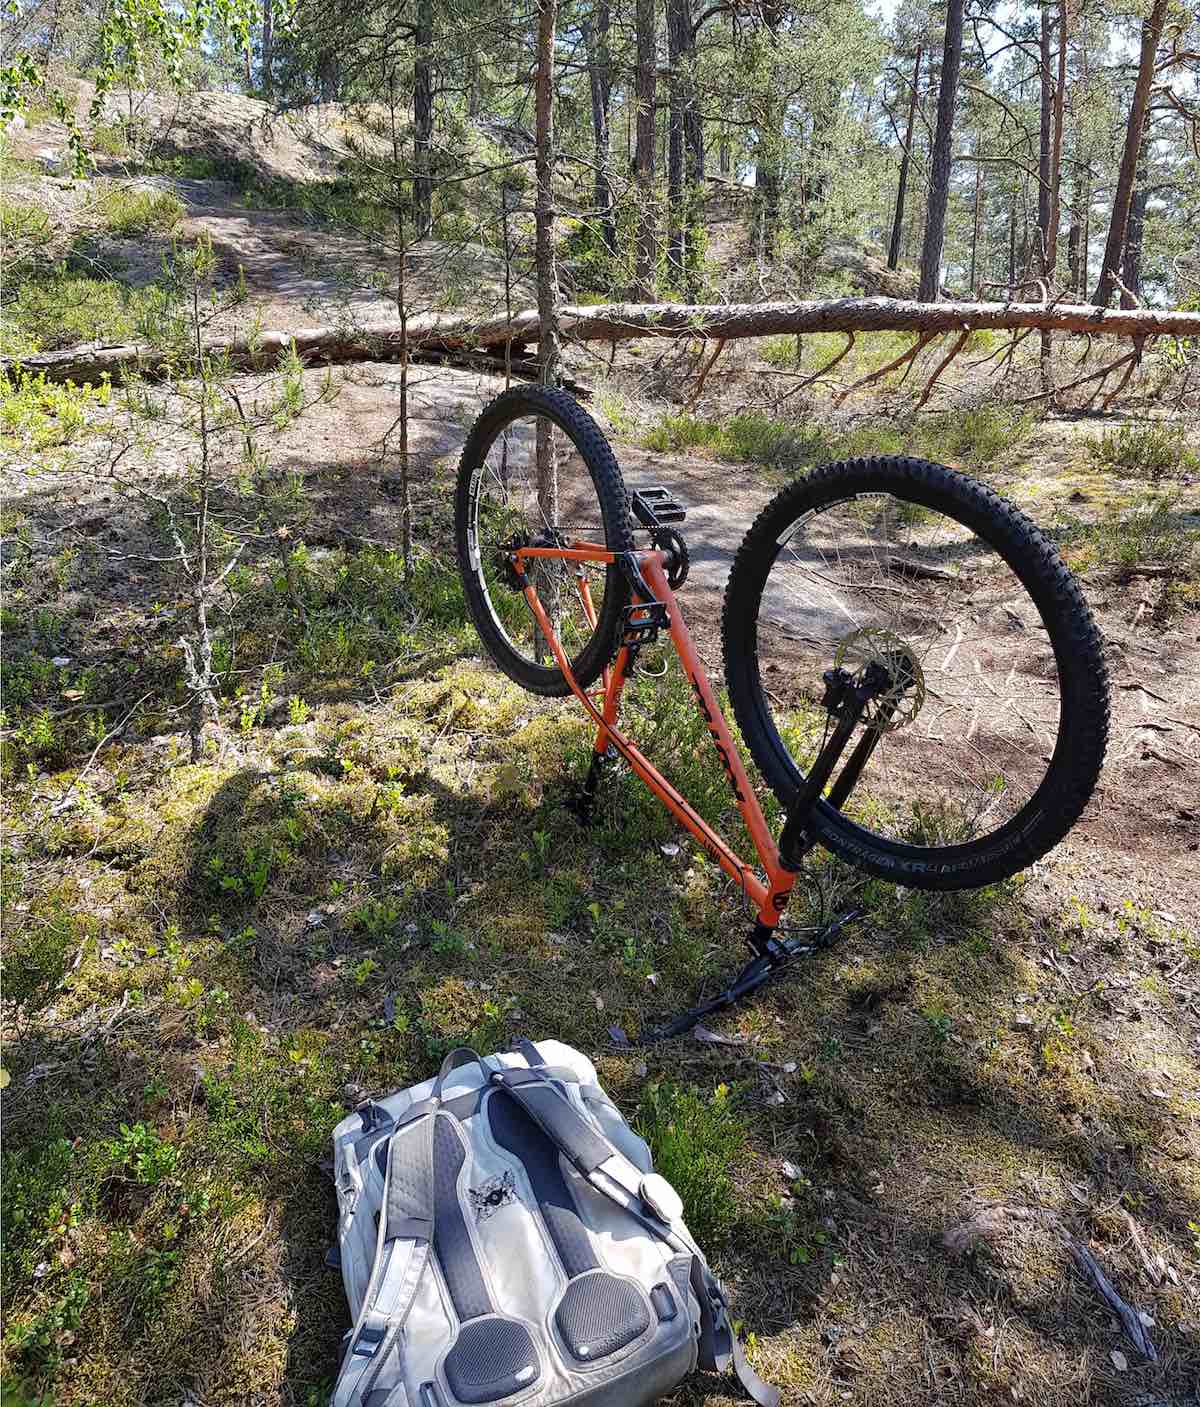 bikerumor pic of the day Hellasgården, Stockholm, sweden, bike being fixed next to a trail in the woods with a log crossing it.